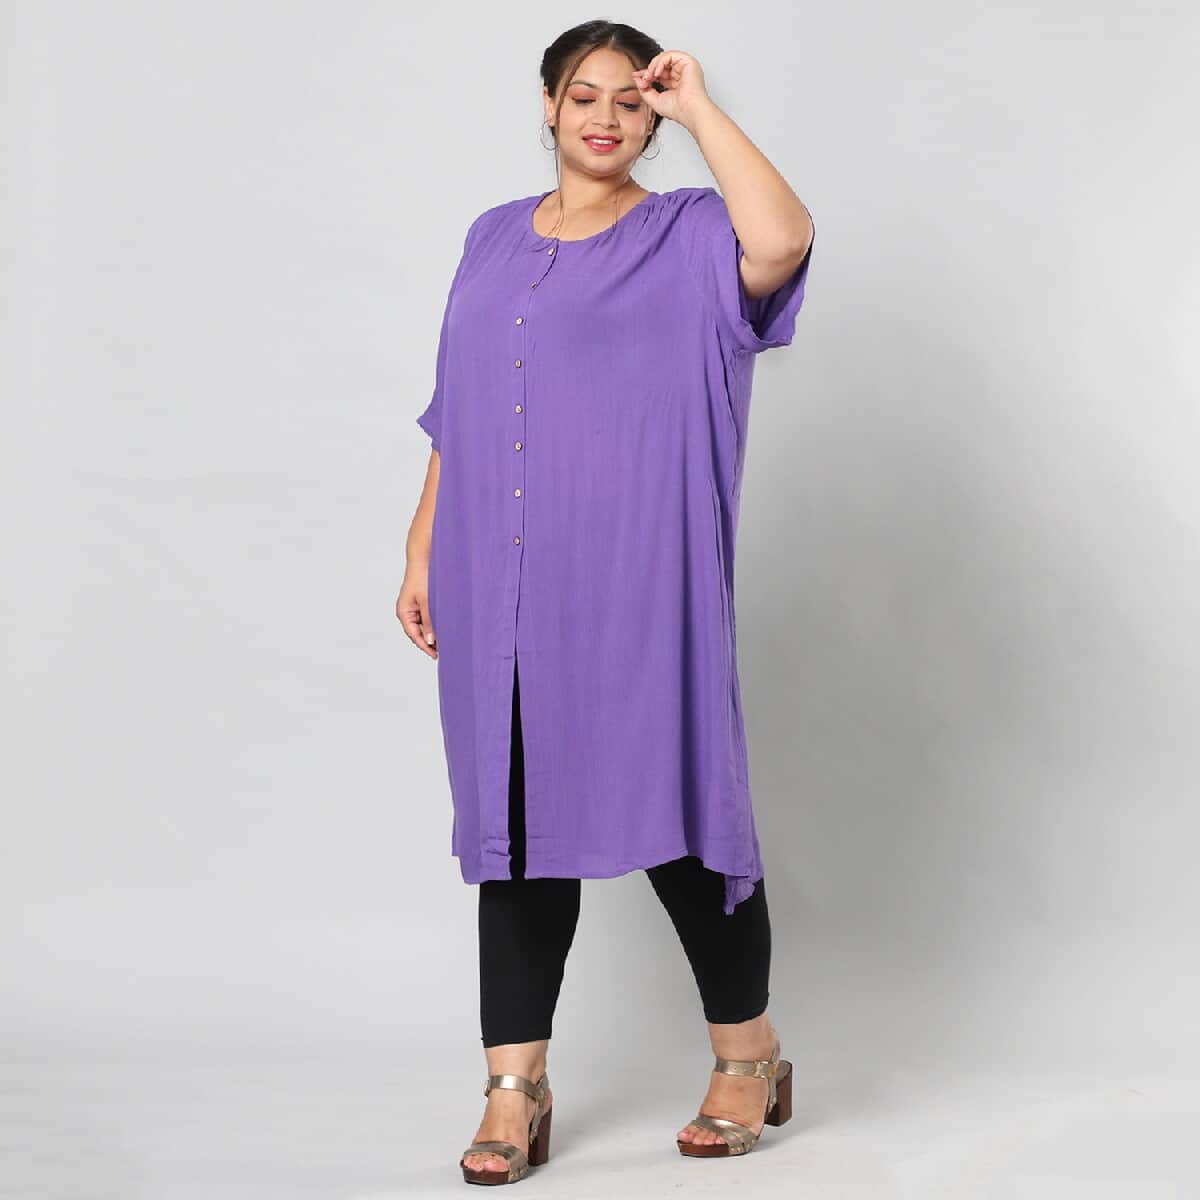 Purple 100% Rayon Top with Front Closure with Button- L/XL image number 3